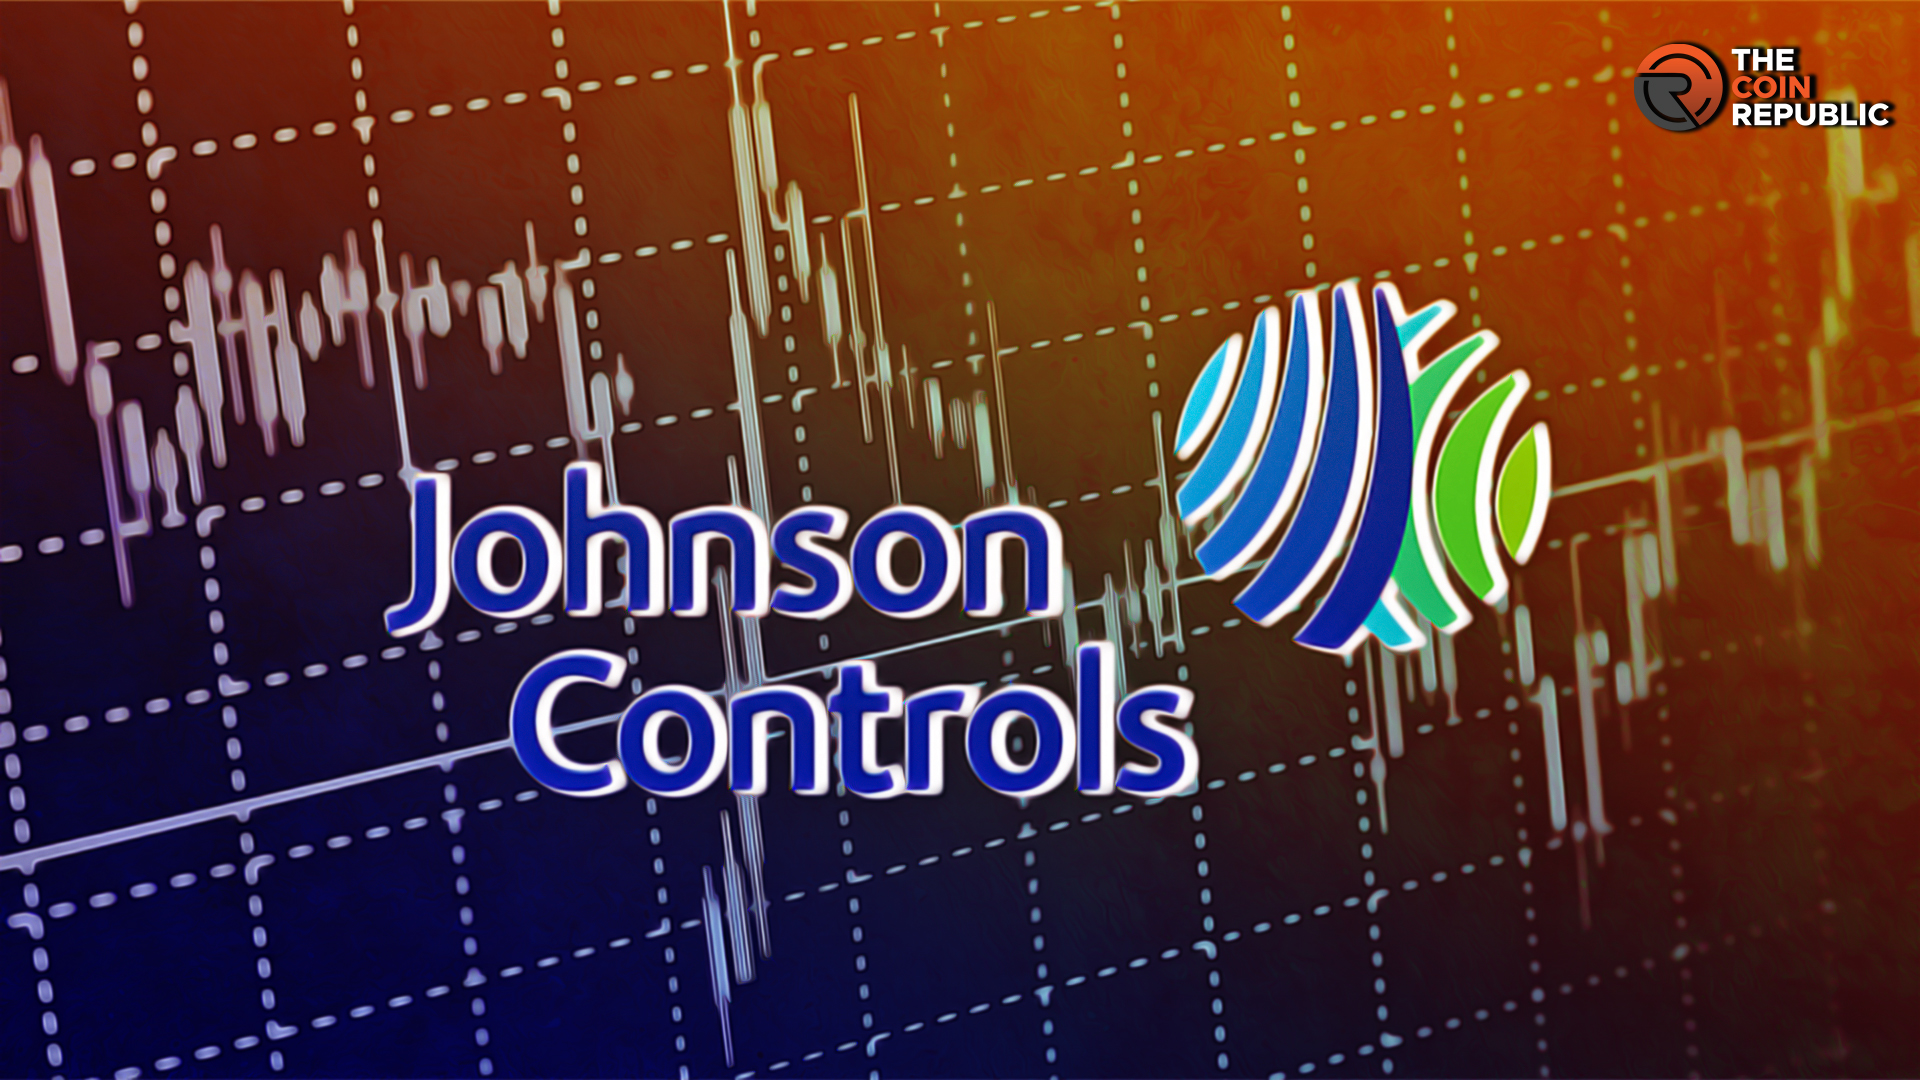 Is Johnson Stock Going to Decline by More Than 15% in the Future?